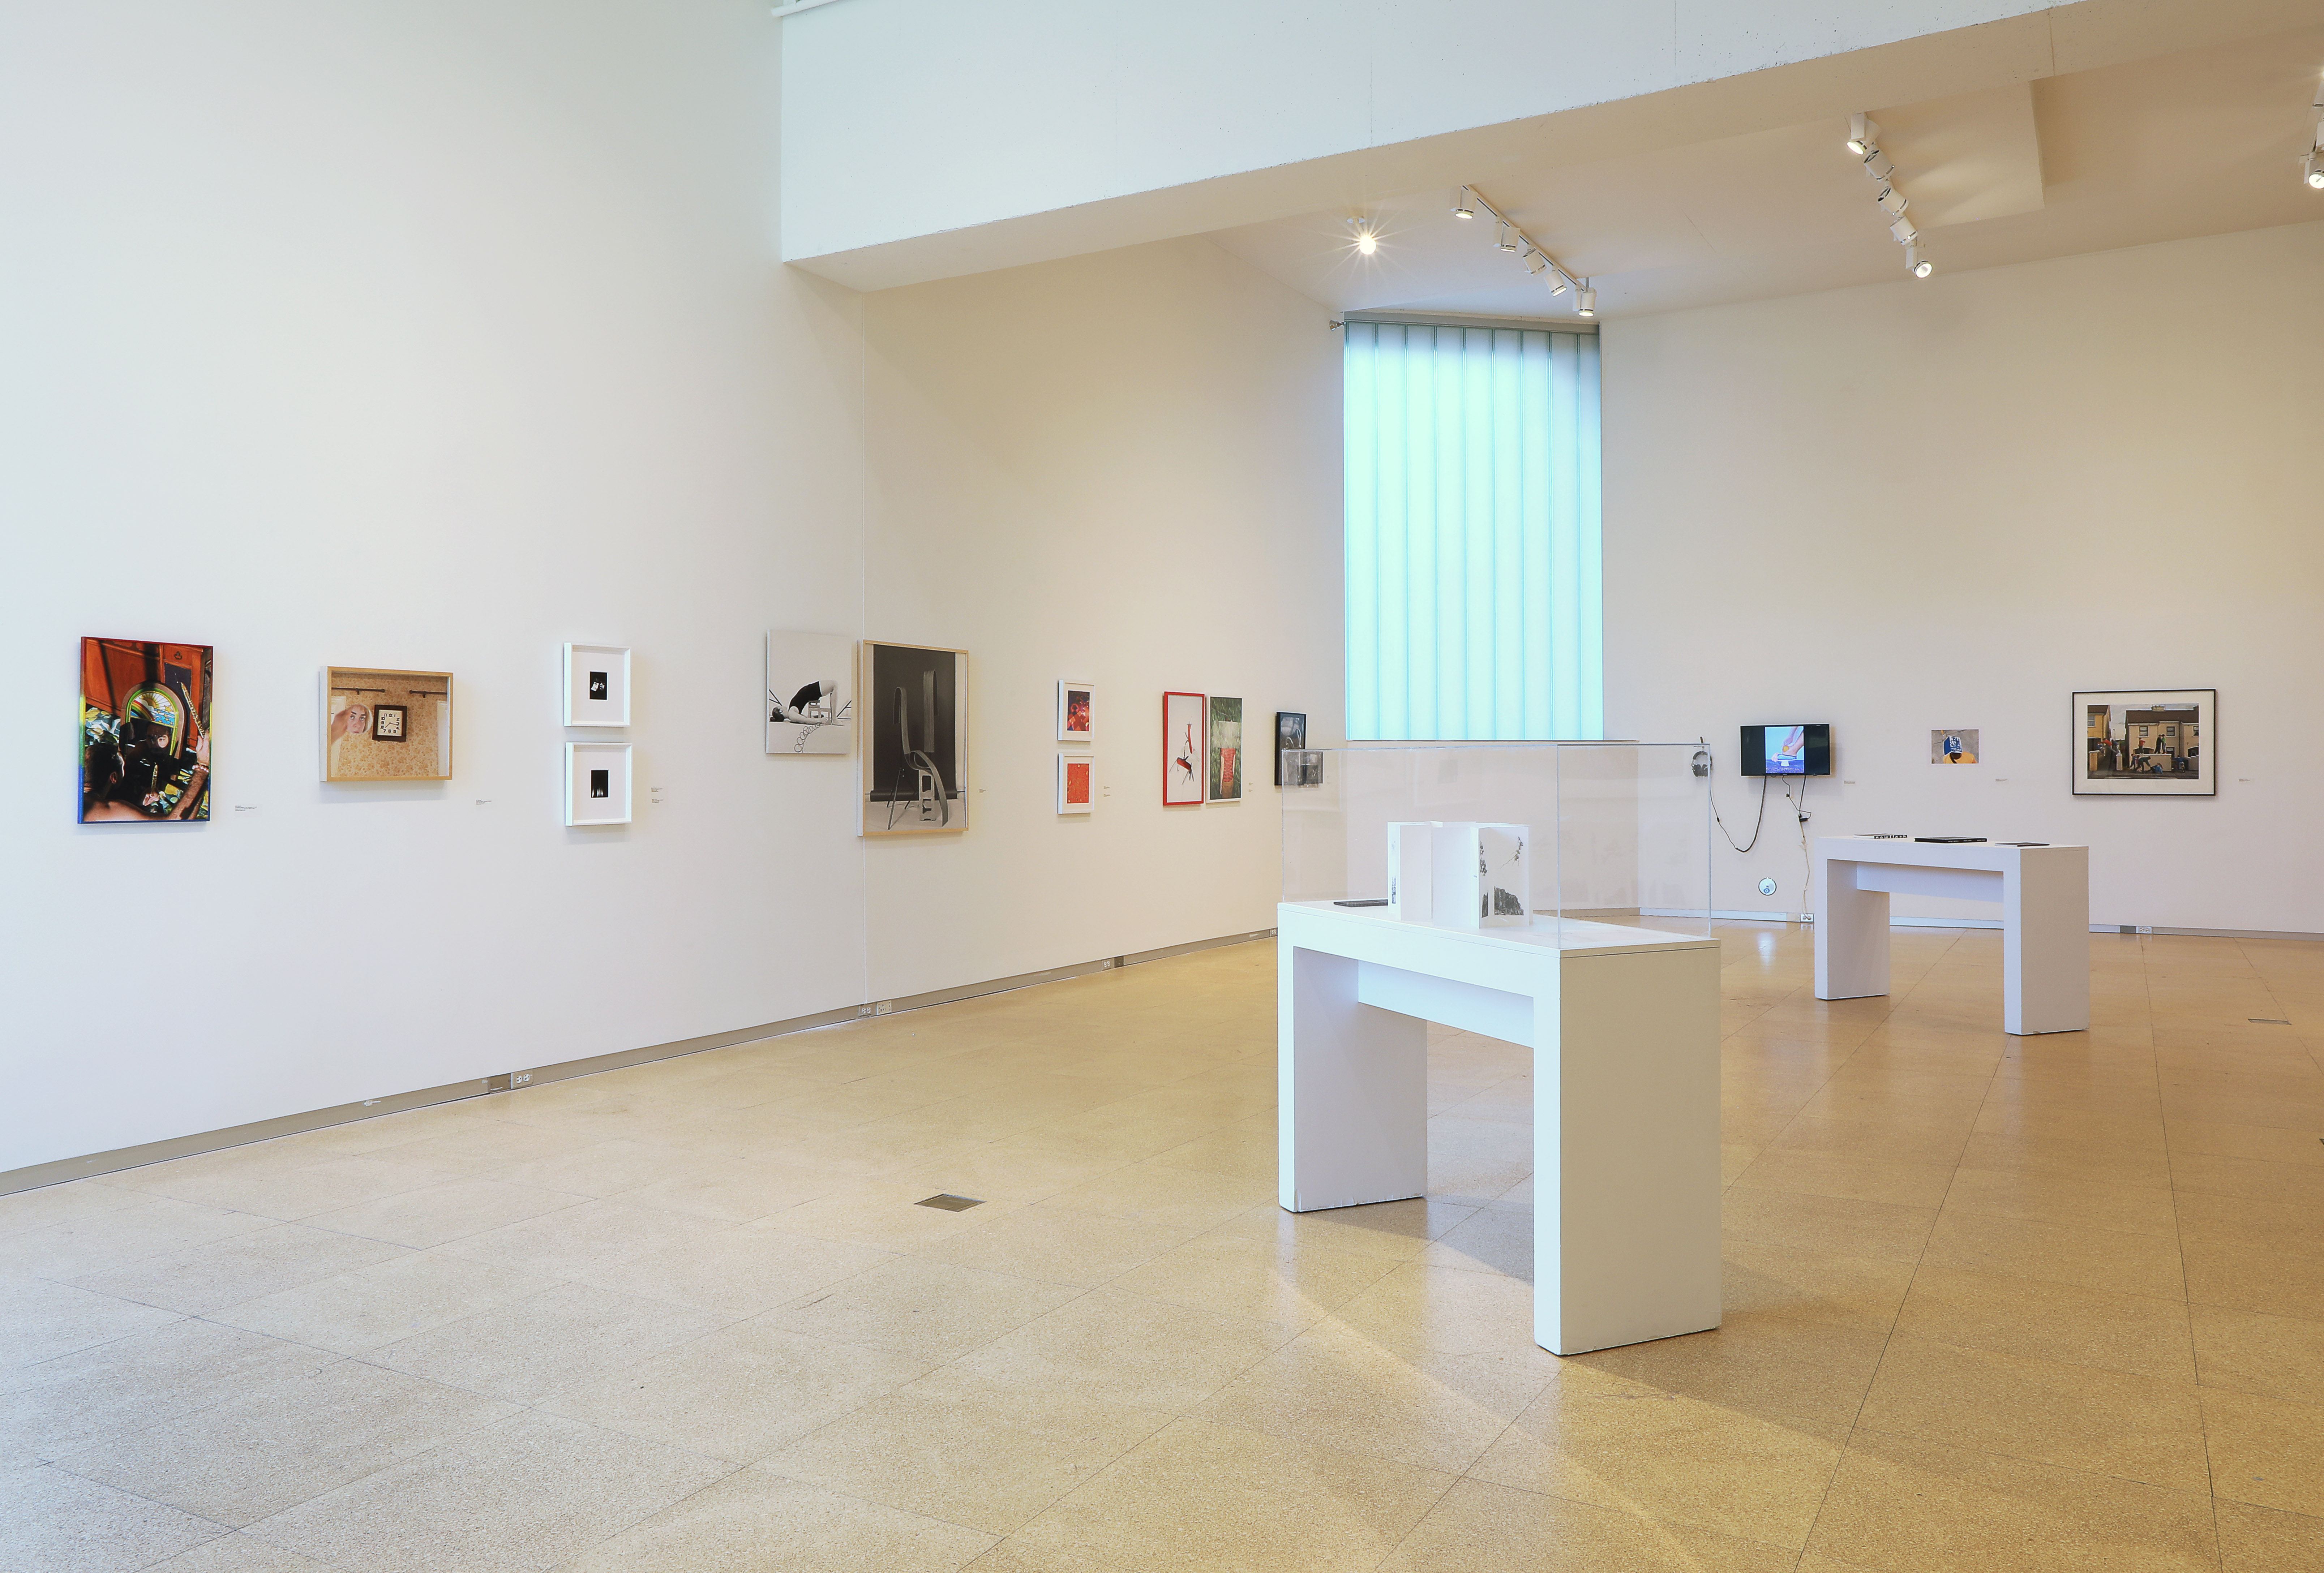 Installation view of photographs from the 2022 National Photography Invitational